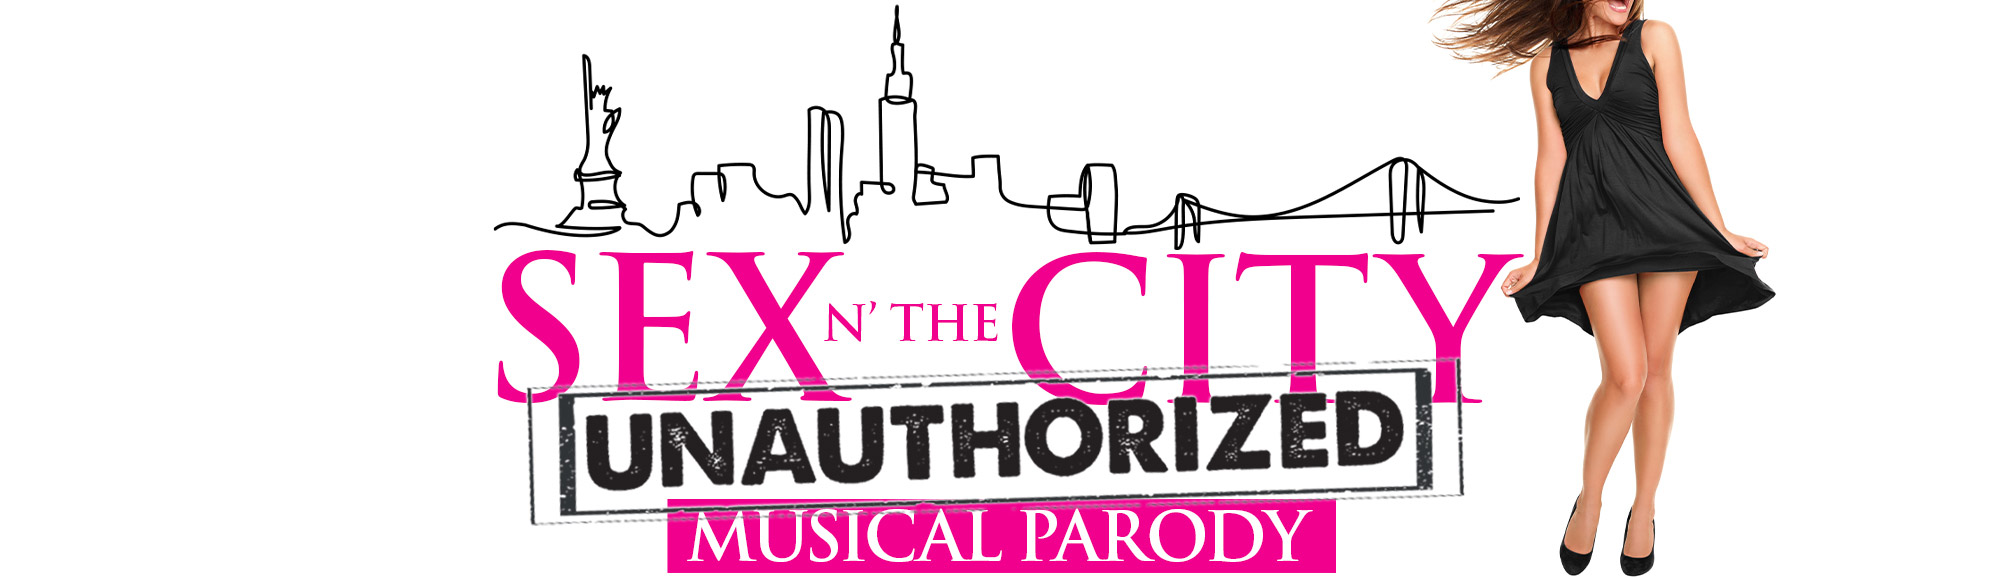 Sex n' The City Unauthorized Musical Parody show